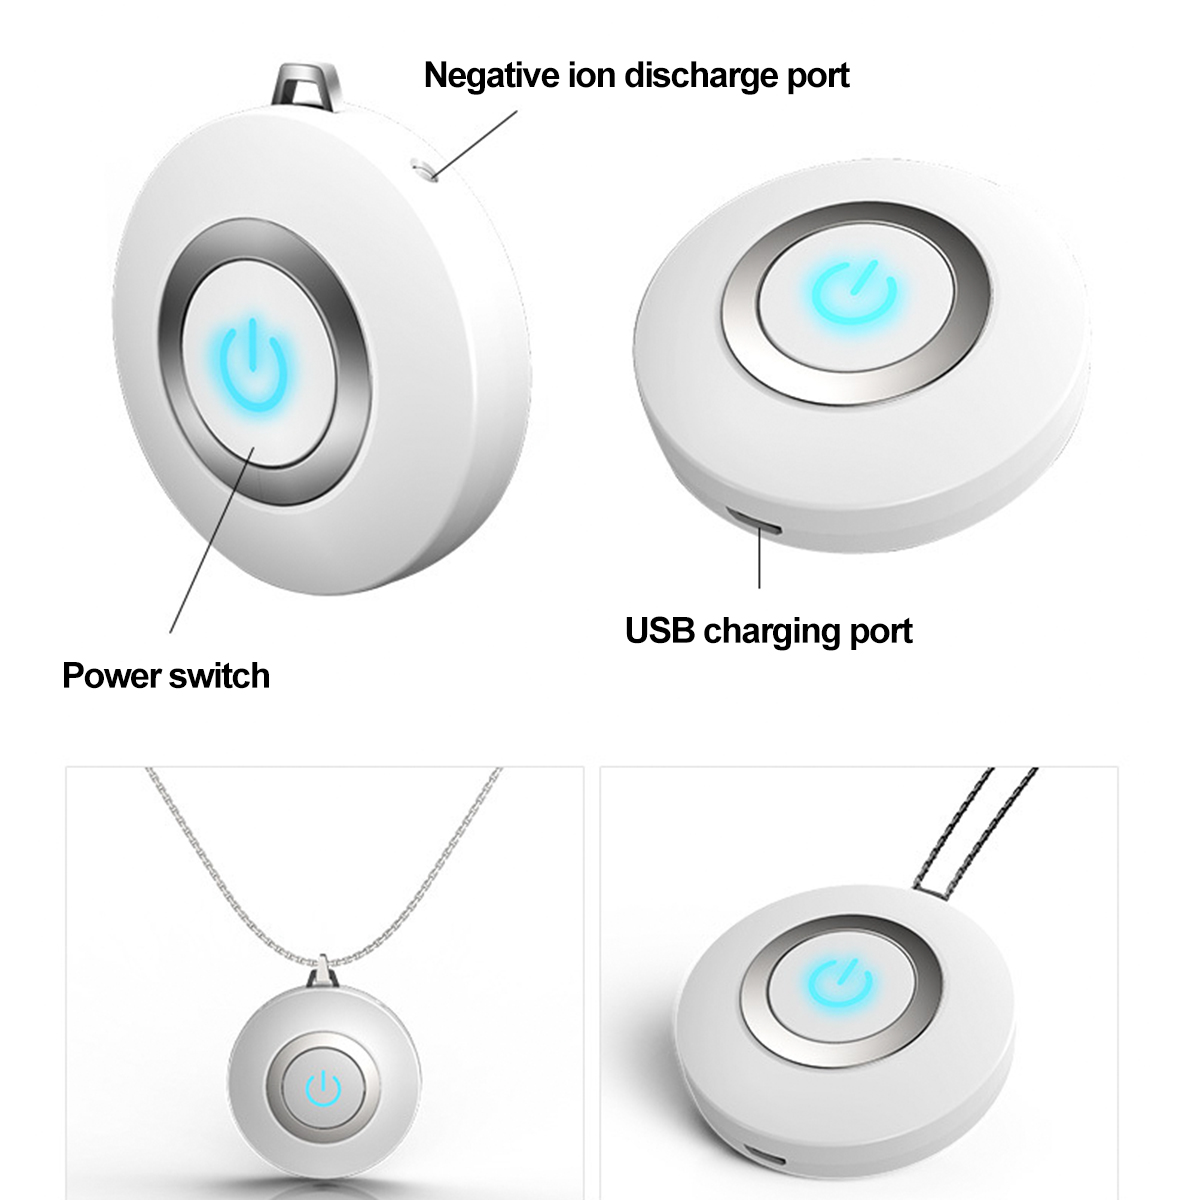 Wearable-Air-Purifier-Necklace-Mini-Portable-USB-Negative-Ion-Air-Cleaner-Freshener-1670191-6